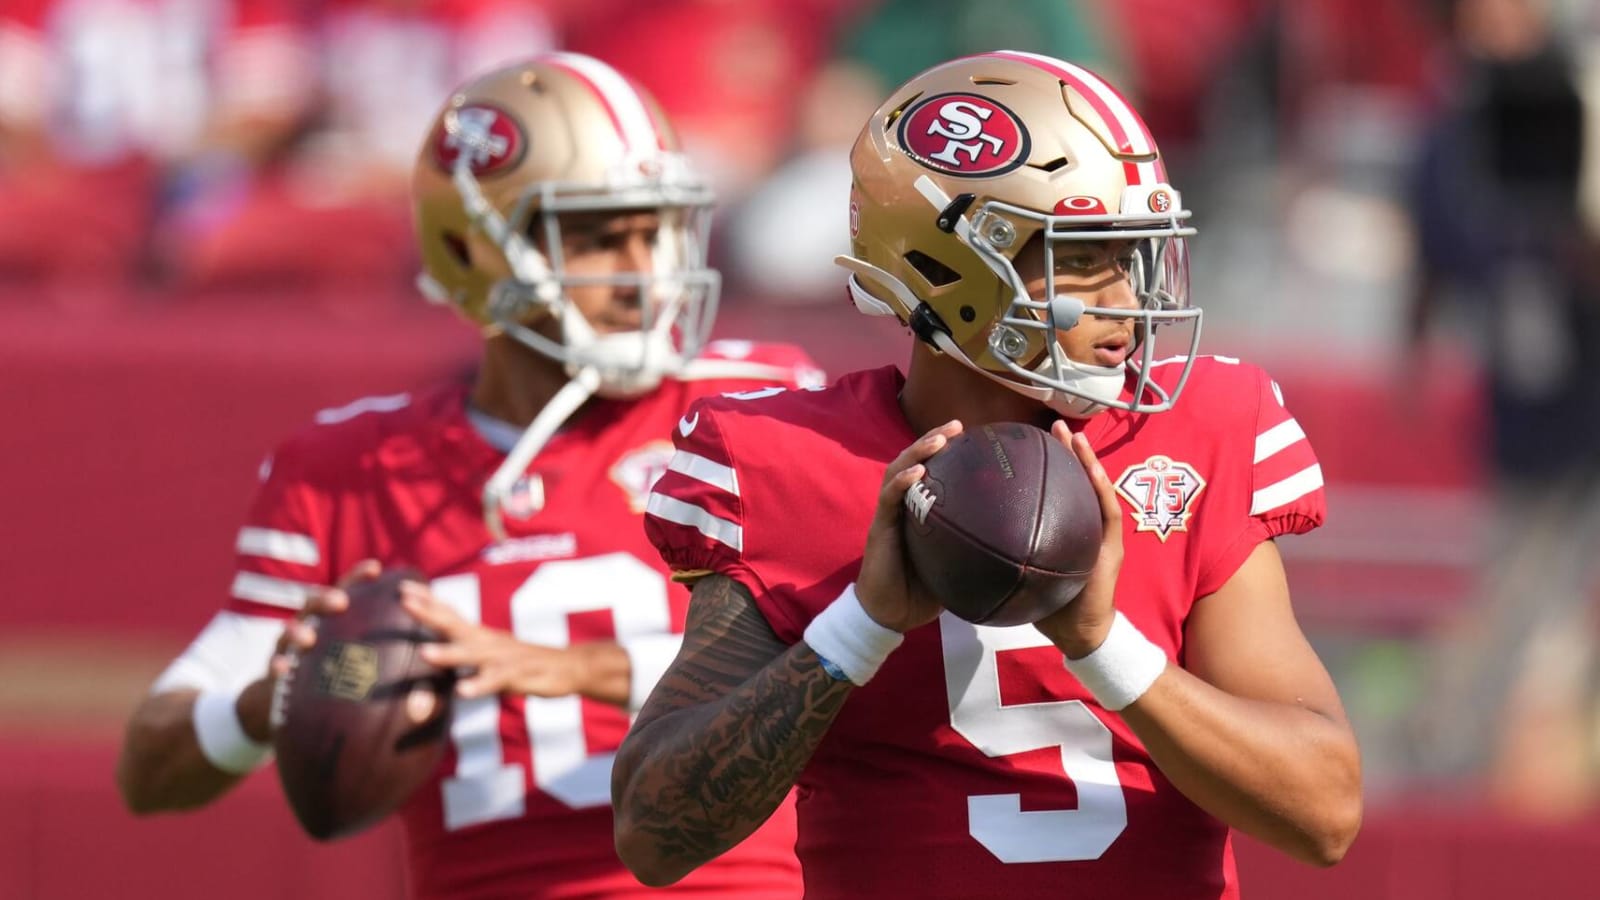 Armstead defends Garoppolo, expects 'great things from' Lance